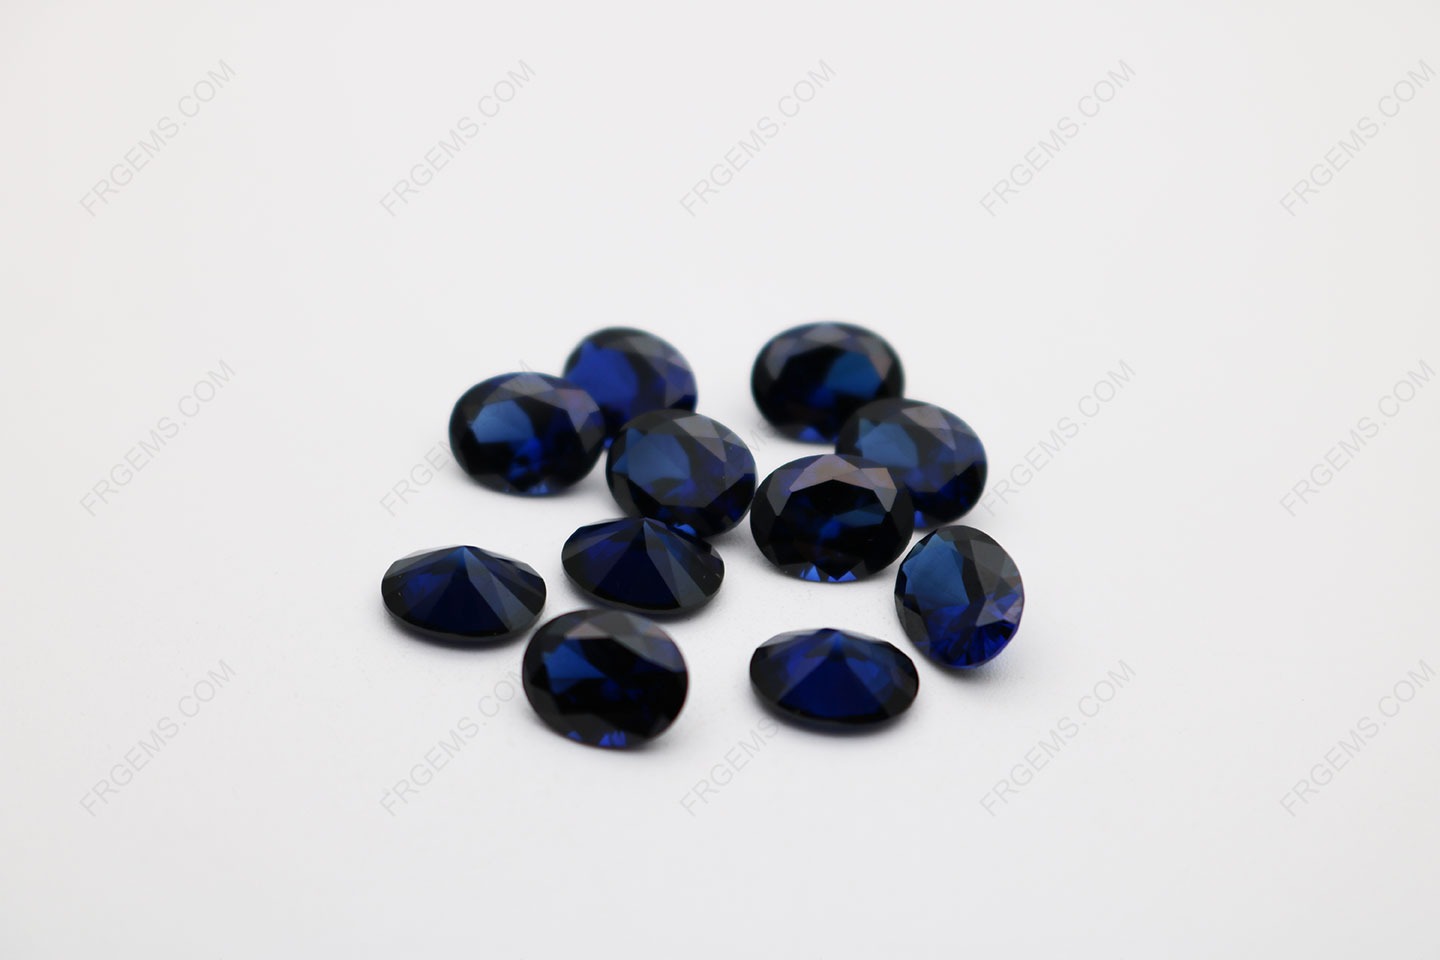 Loose Synthetic Lab Created Corundum Blue Sapphire 34# Oval Shape Faceted Cut 7x9mm stones IMG_0931